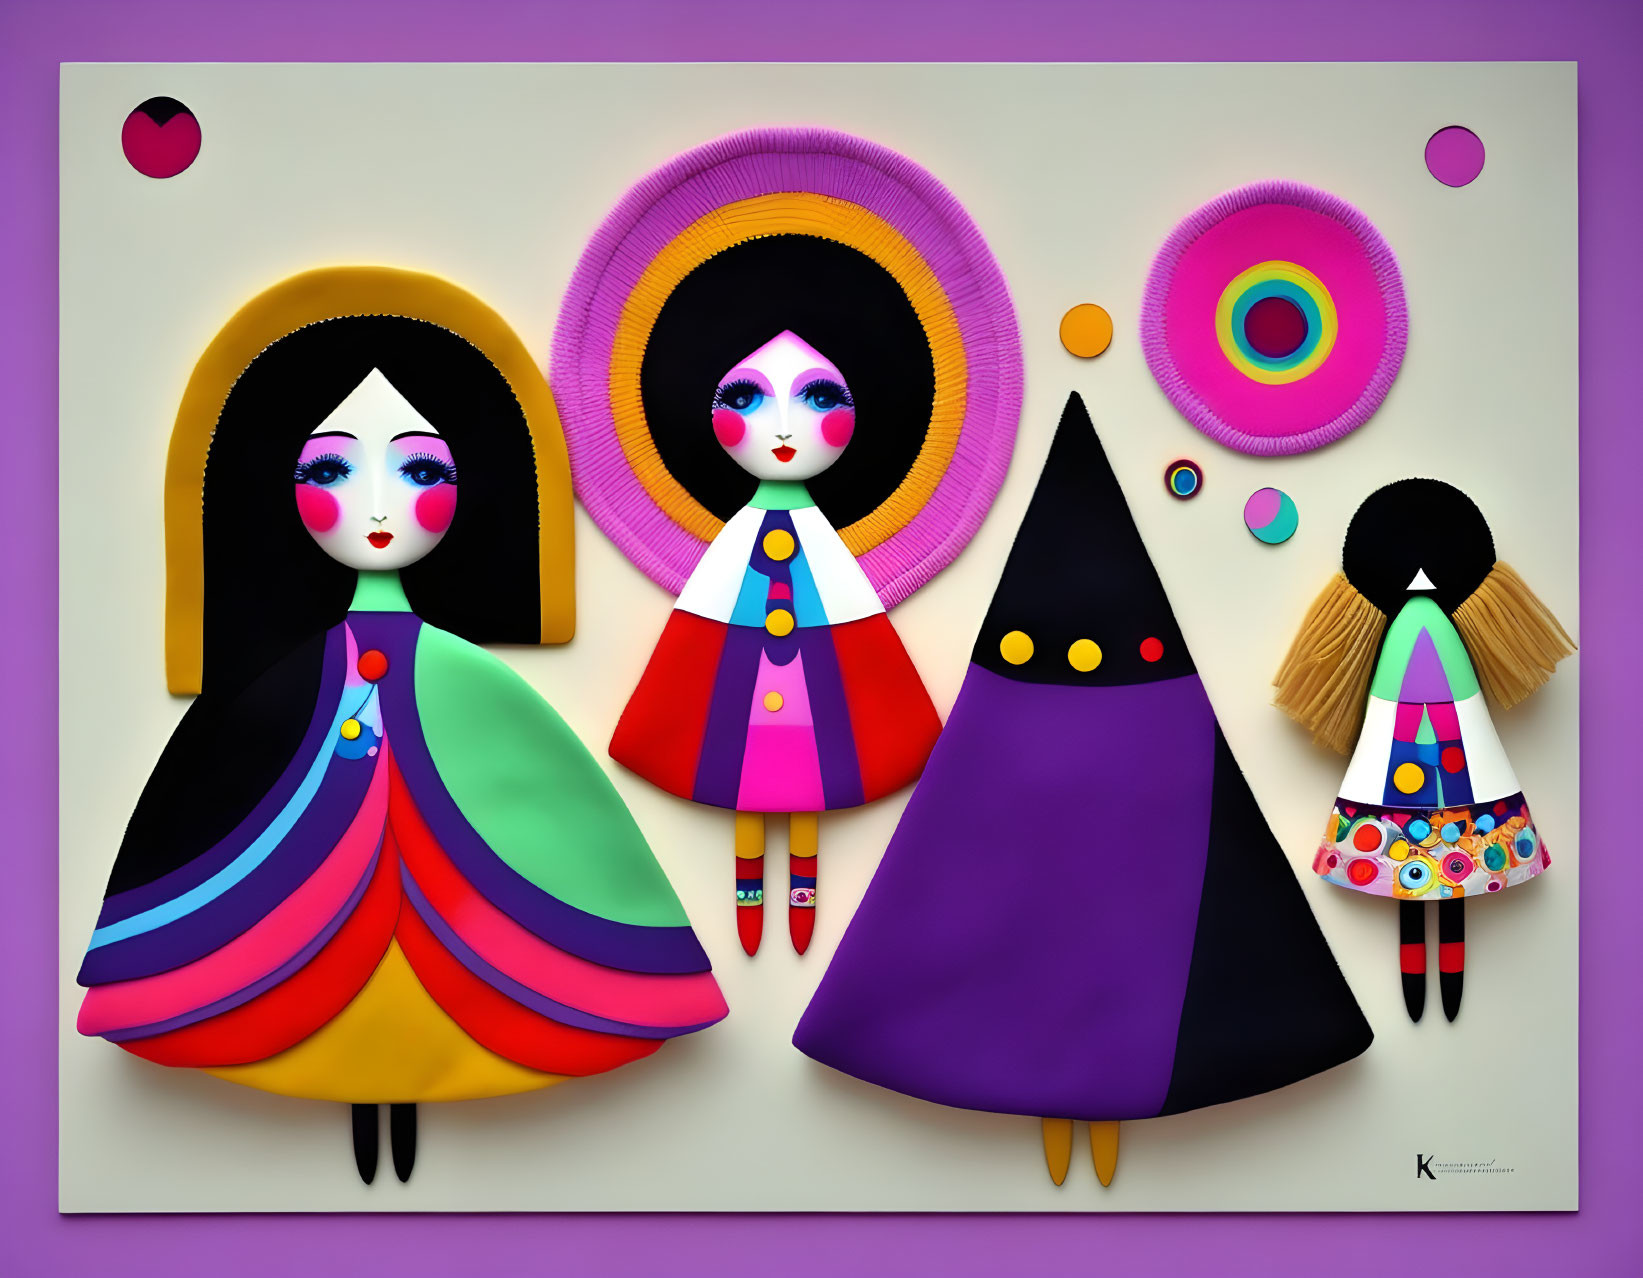 Vibrant artwork of stylized figures with bold eyes and geometric attire on circular and elliptical shapes